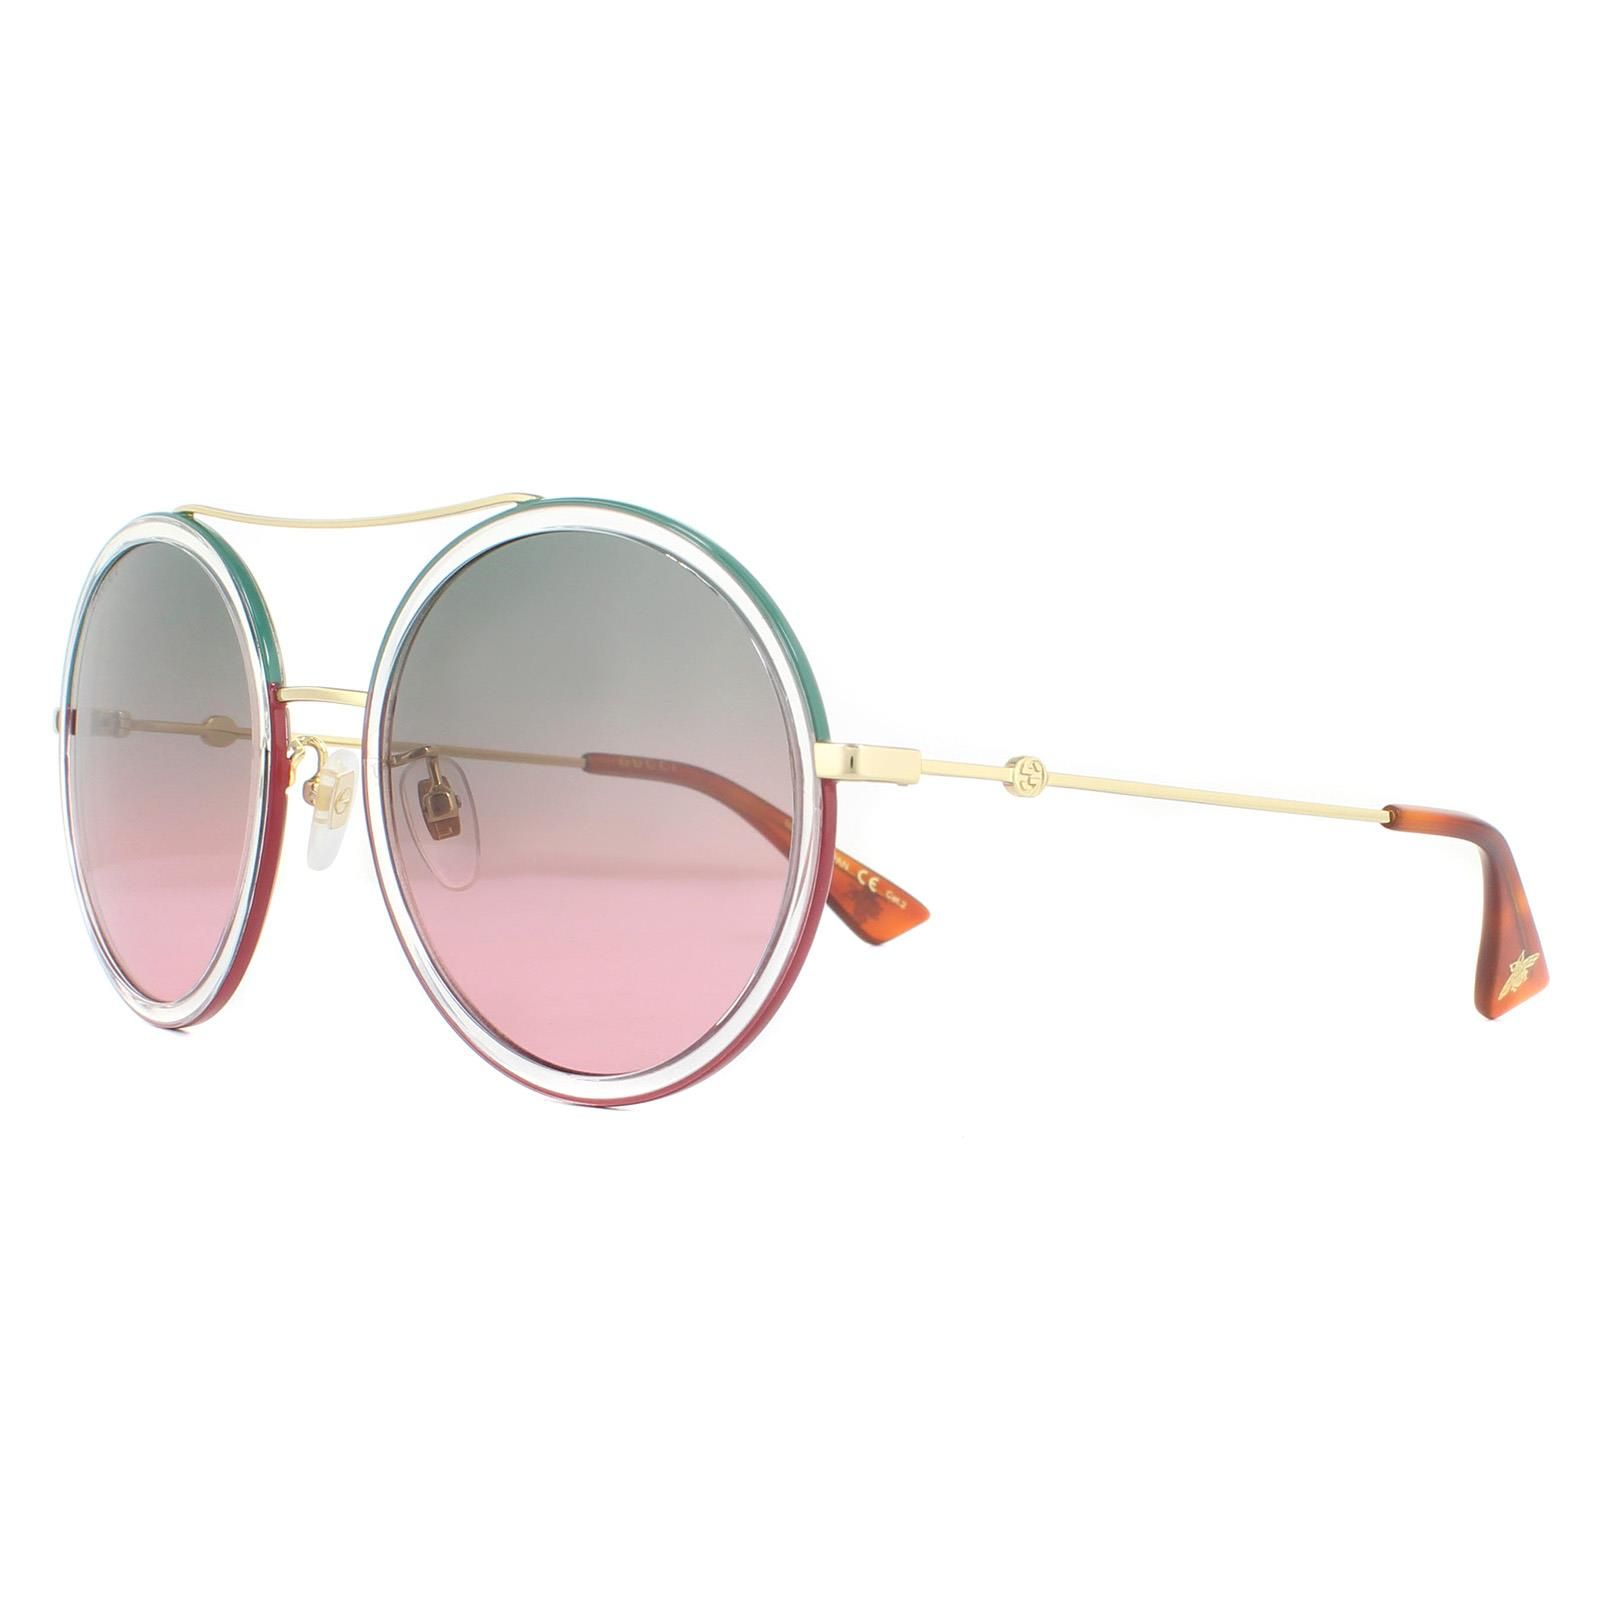 Gucci Sunglasses GG0061S 022 Gold Green and Red Green to Red Gradient